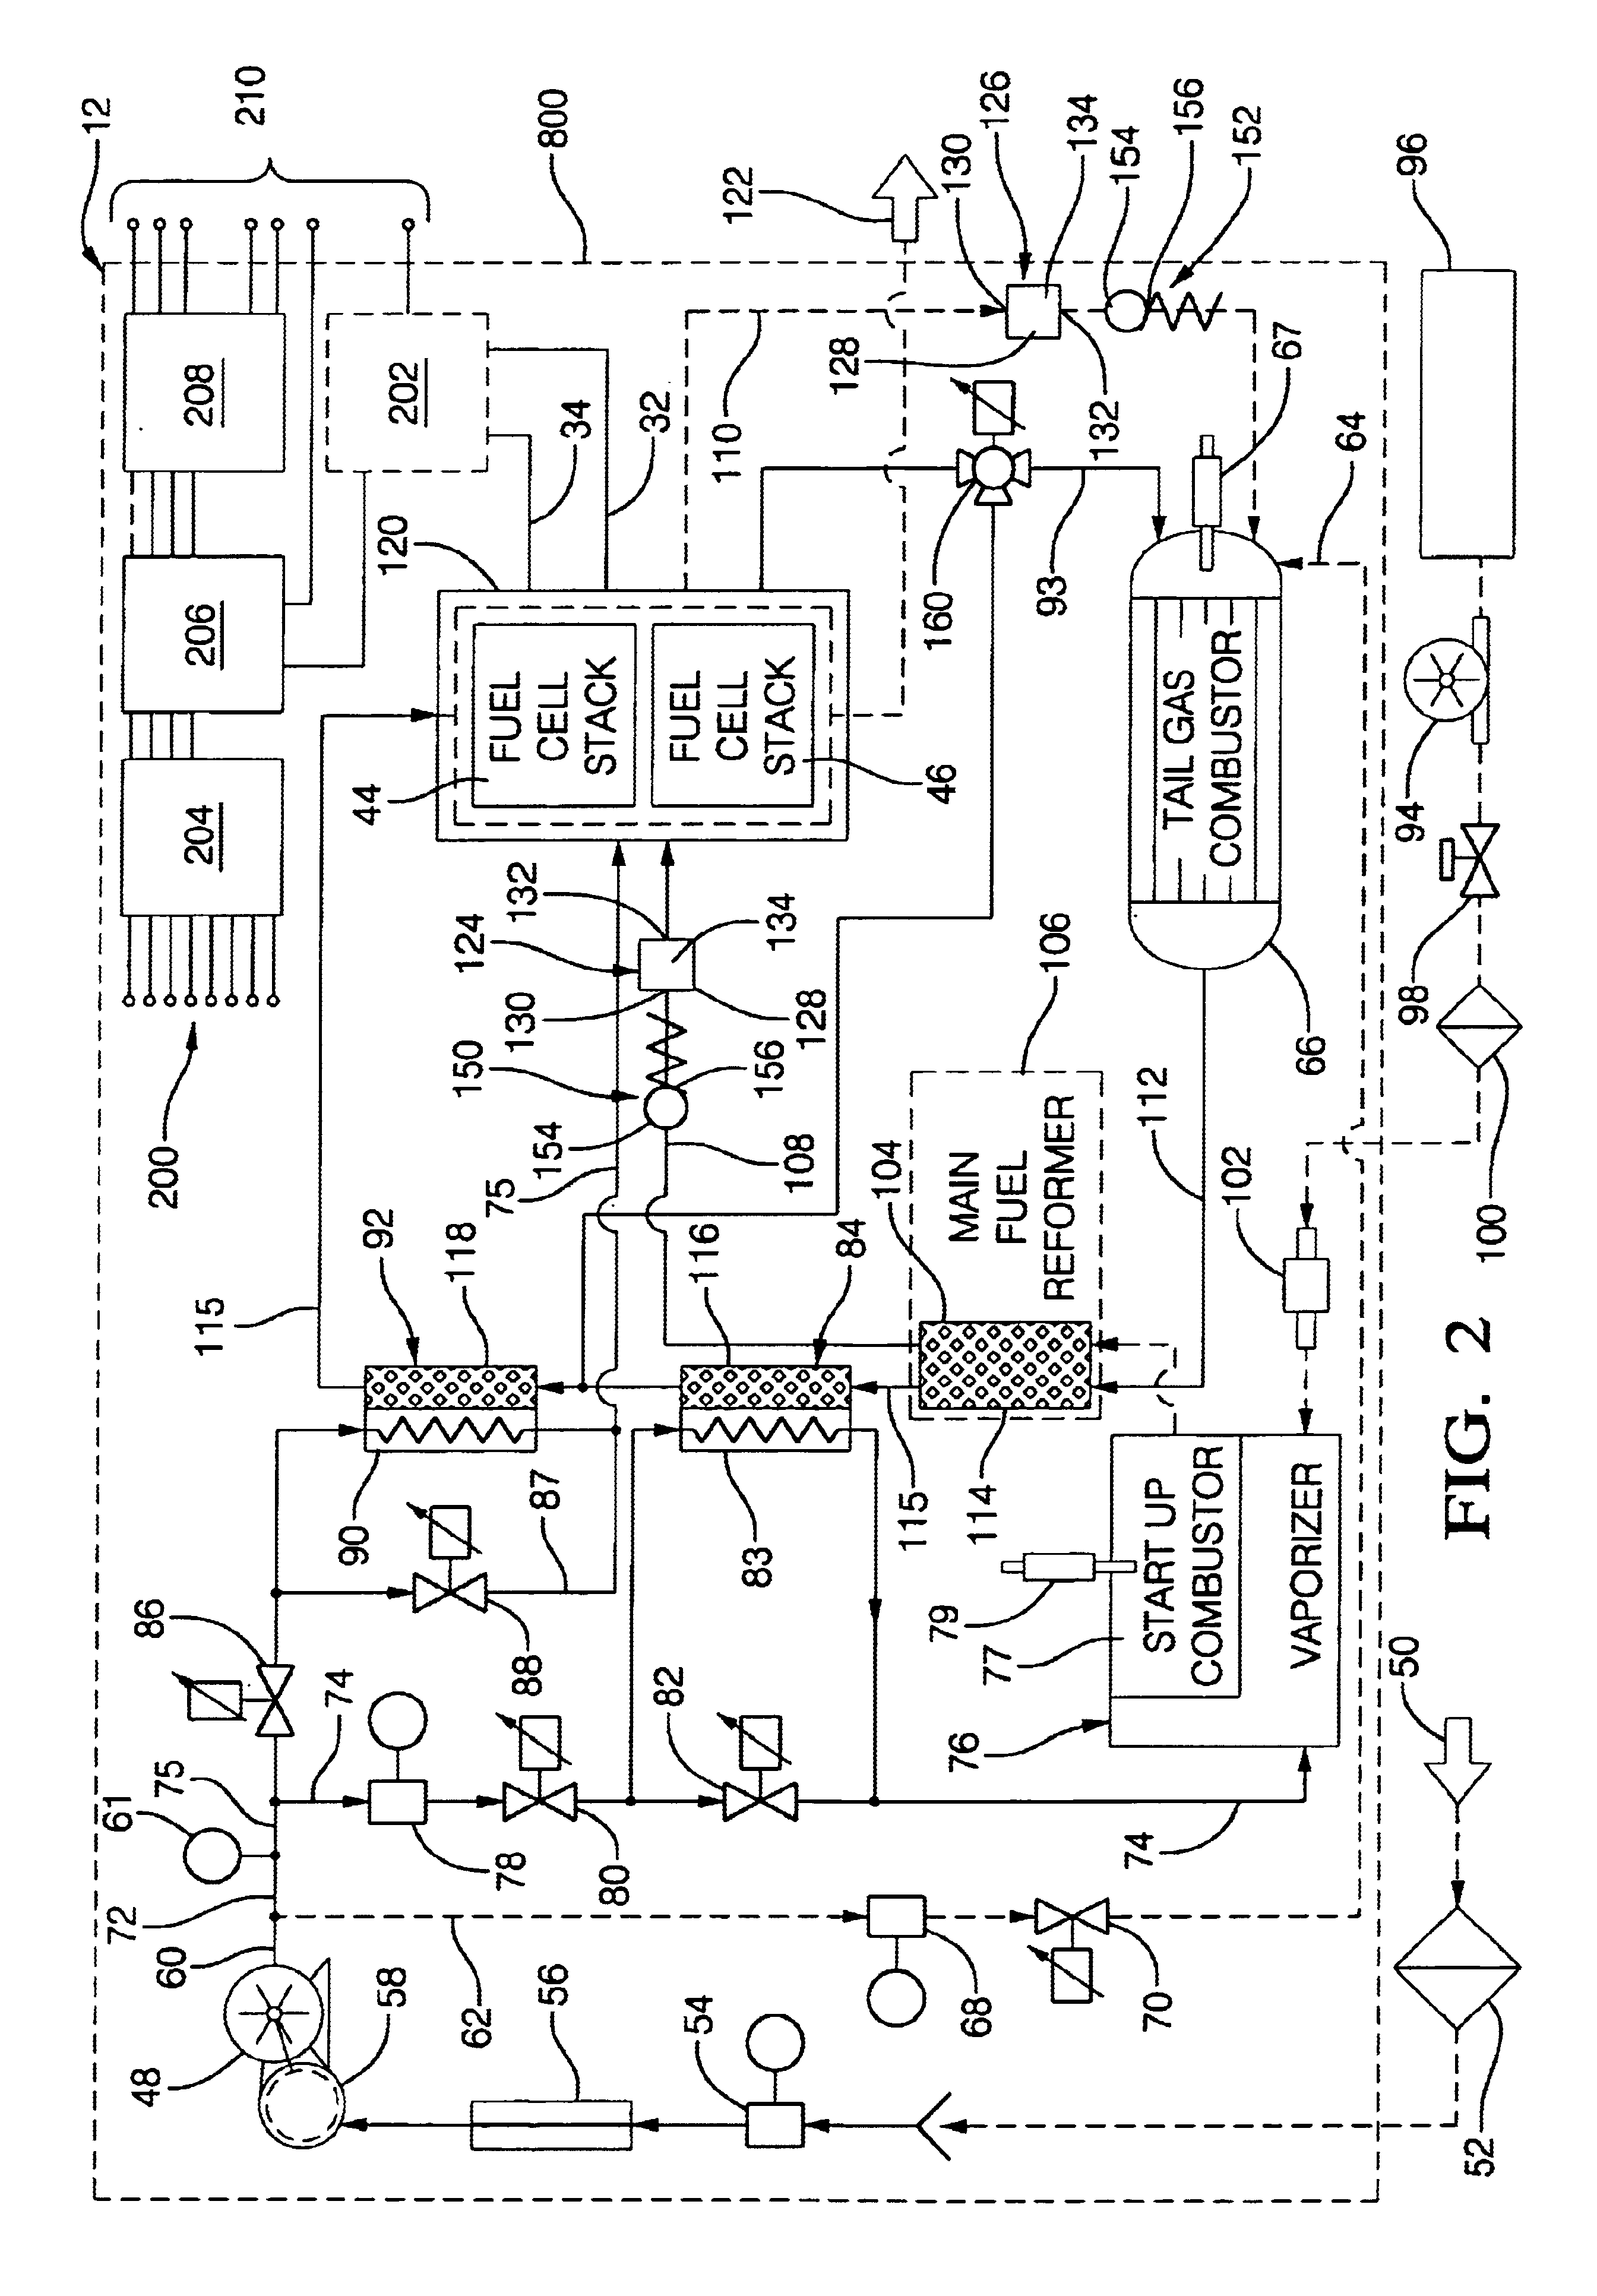 Solid-oxide fuel cell system having an integrated reformer and waste energy recovery system